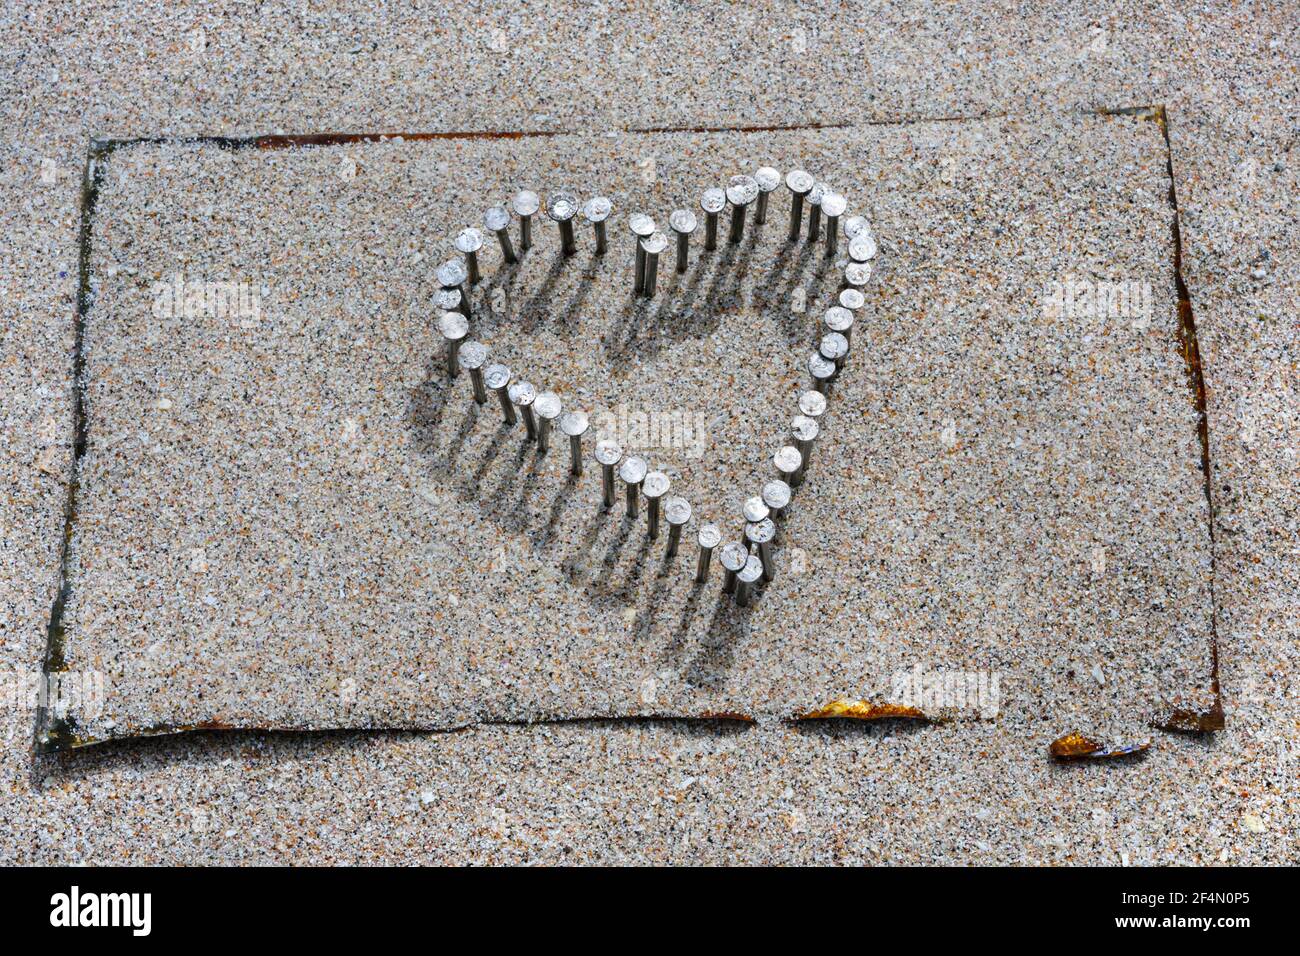 Heart of nails hammered into flattened tin over wooden plank, covered with beach sand. Stock Photo